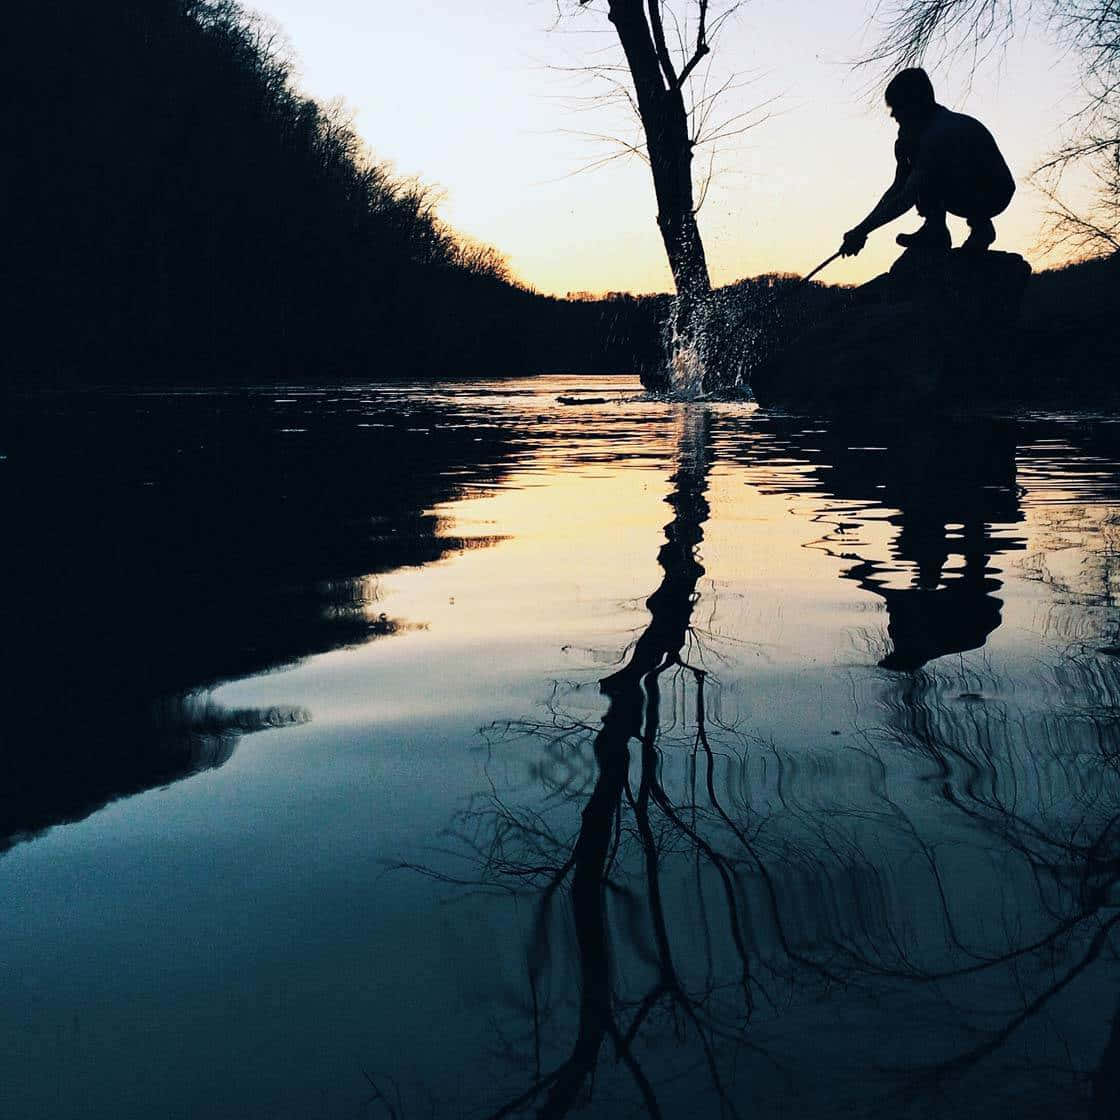 Man Fishing Reflection Picture